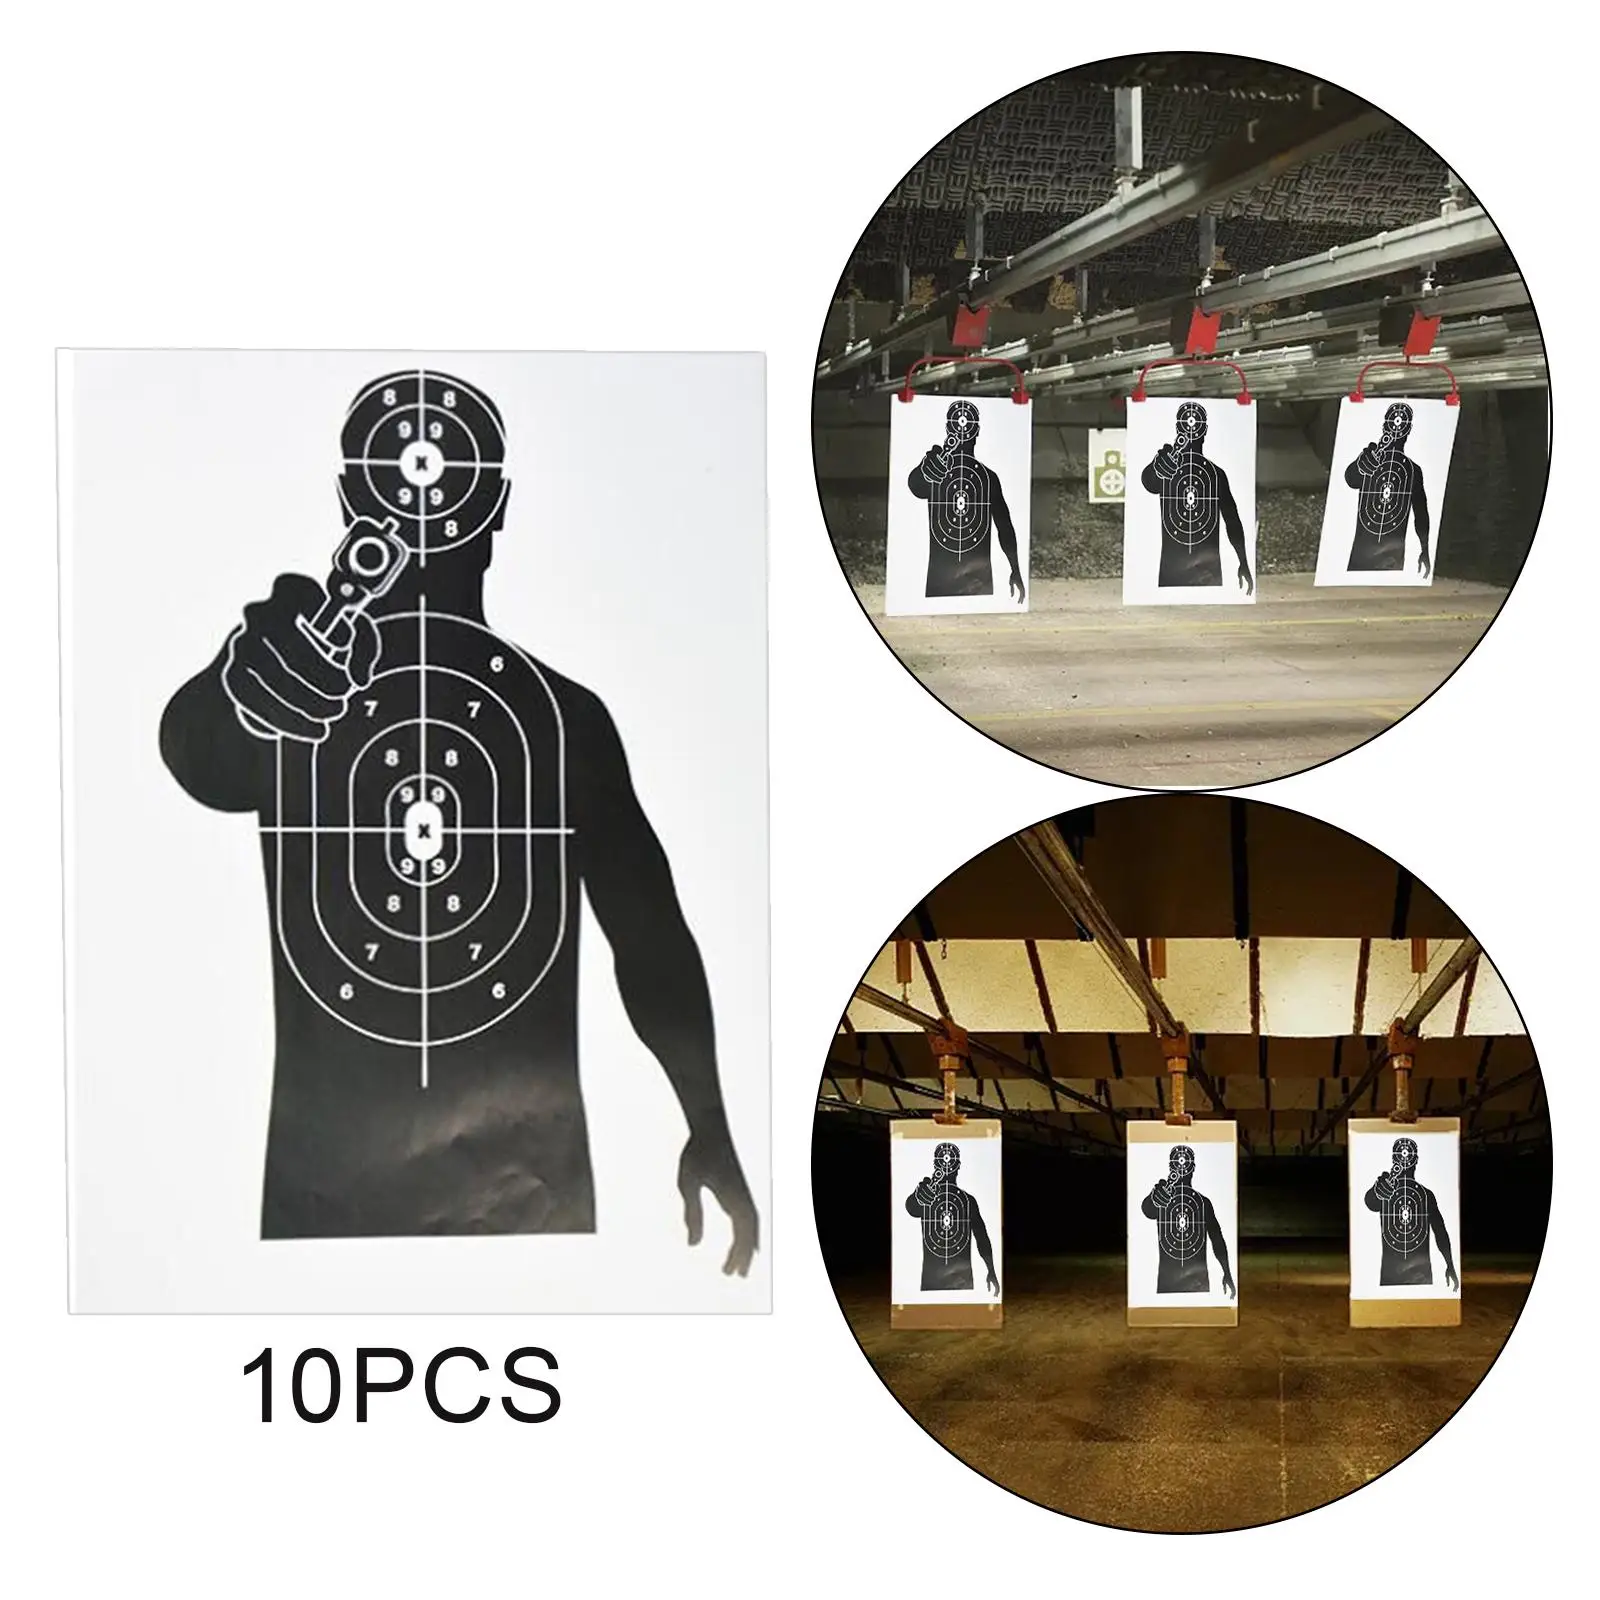 10Pcs Paper Silhouette Targets, for Indoor and Outdoor Shooting, Large 12